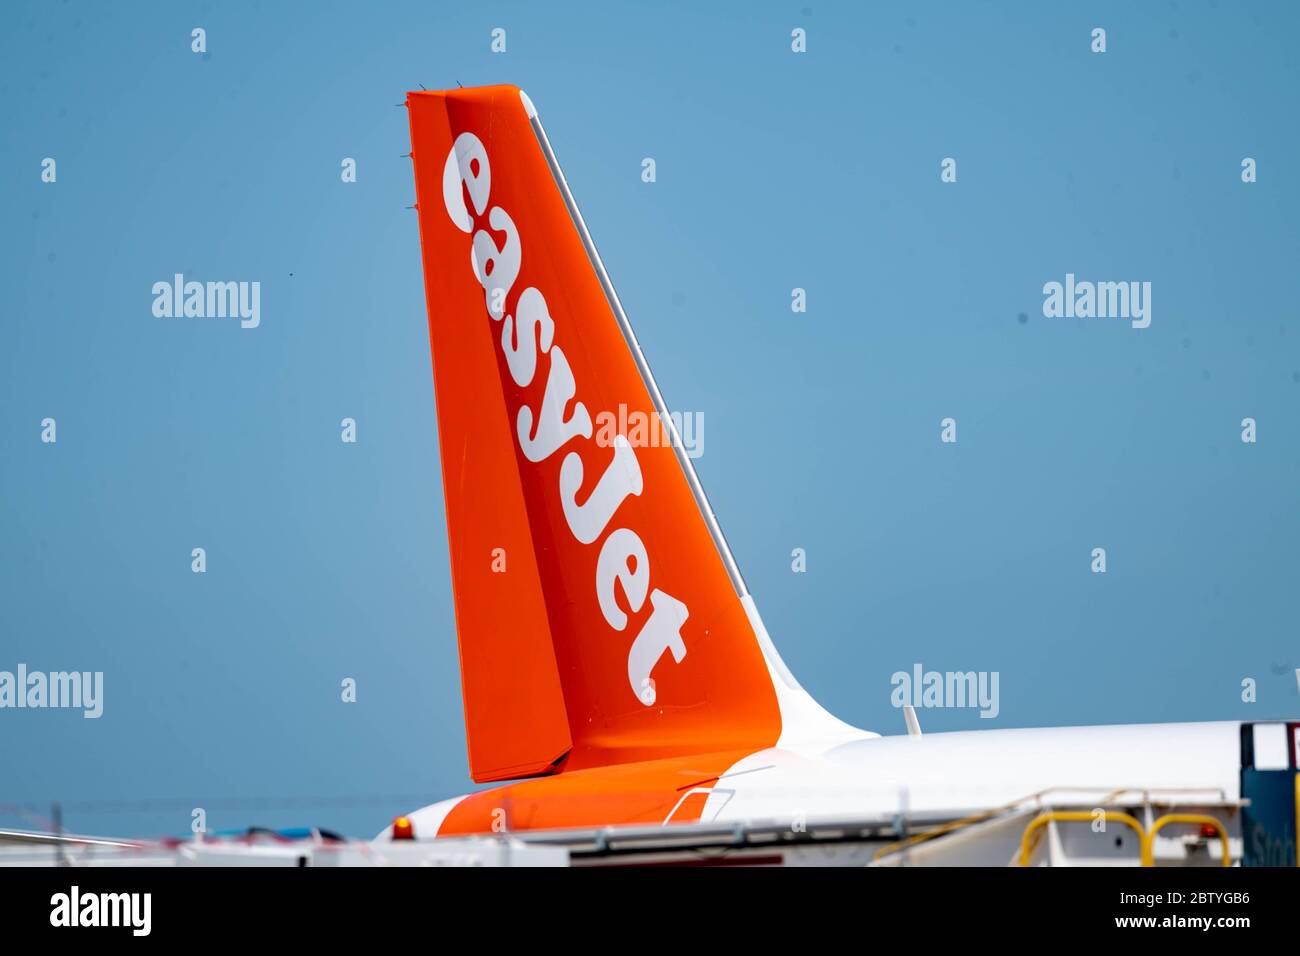 Southend Airport Essex 28th May 2020 Easyjet aeroplanes laid up at Southend airport as Easyjet announces thousands of redundancies in a restructuring Credit: Ian Davidson/Alamy Live News Stock Photo